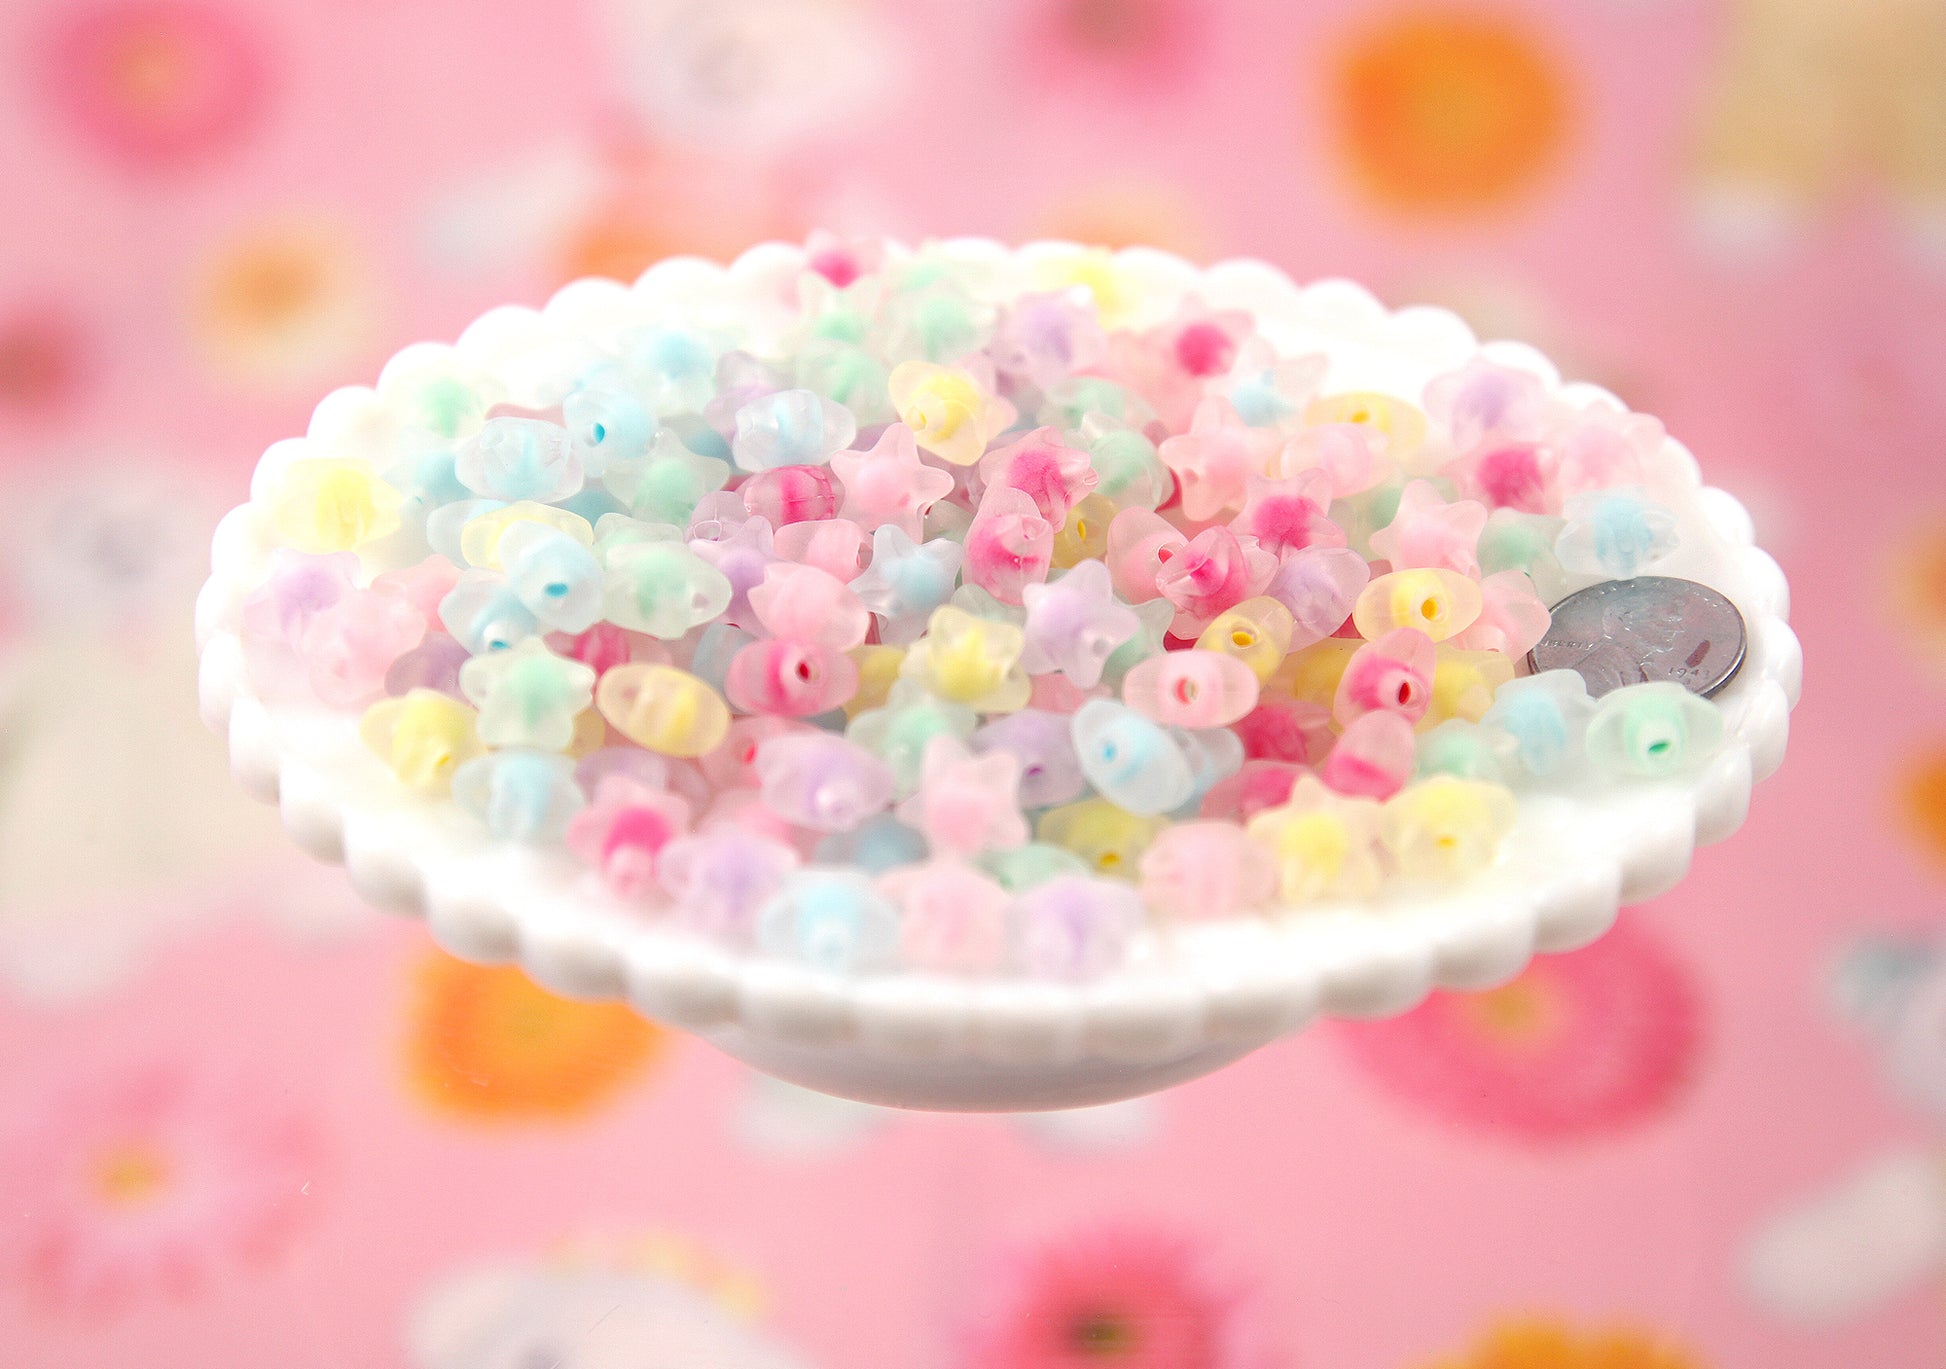 Acrylic Flower Beads - 12mm Small Pastel Transparent Acrylic Flower Be –  Delish Beads